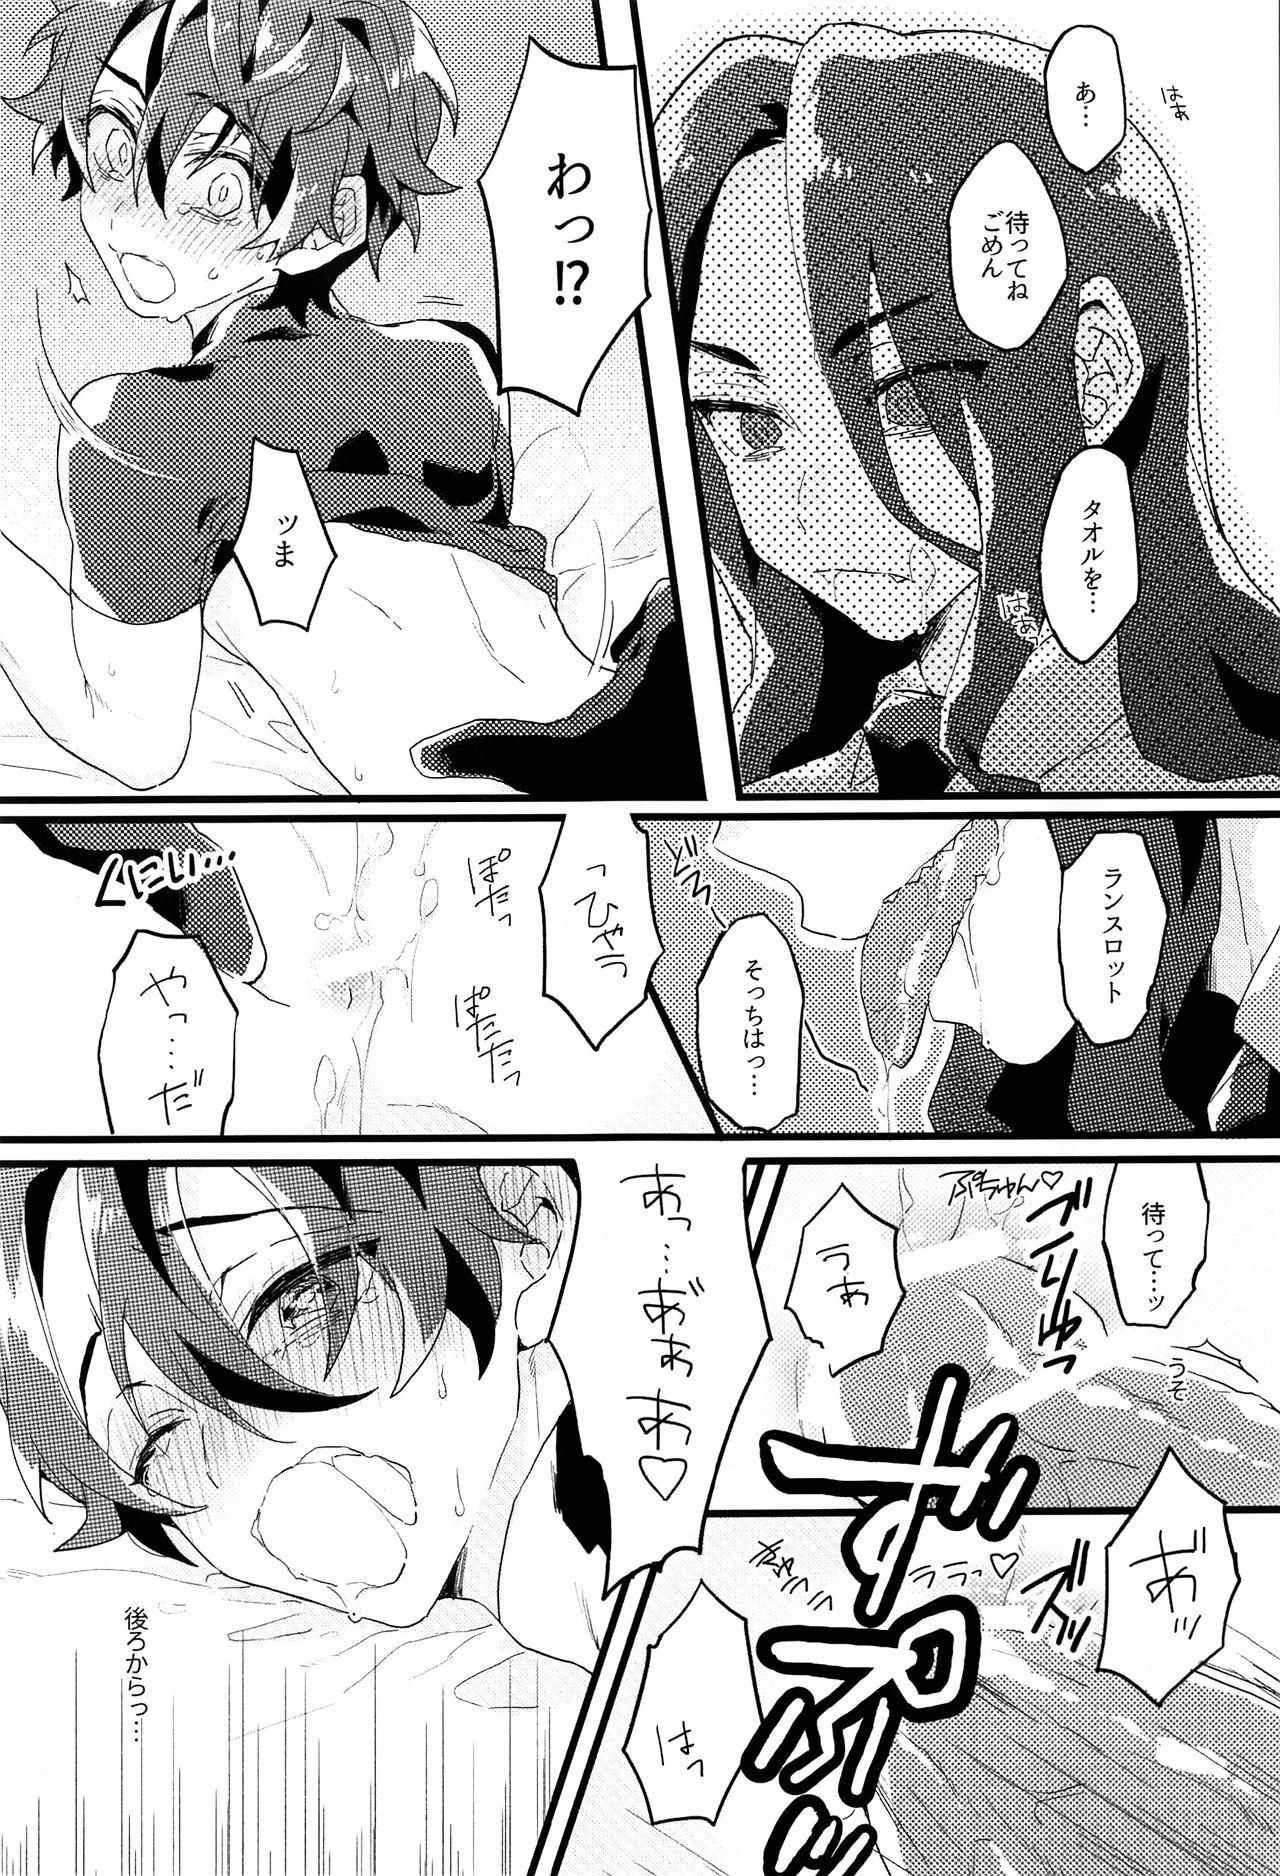 Spycam hungry sharp chune - Fate grand order Gayfuck - Page 5